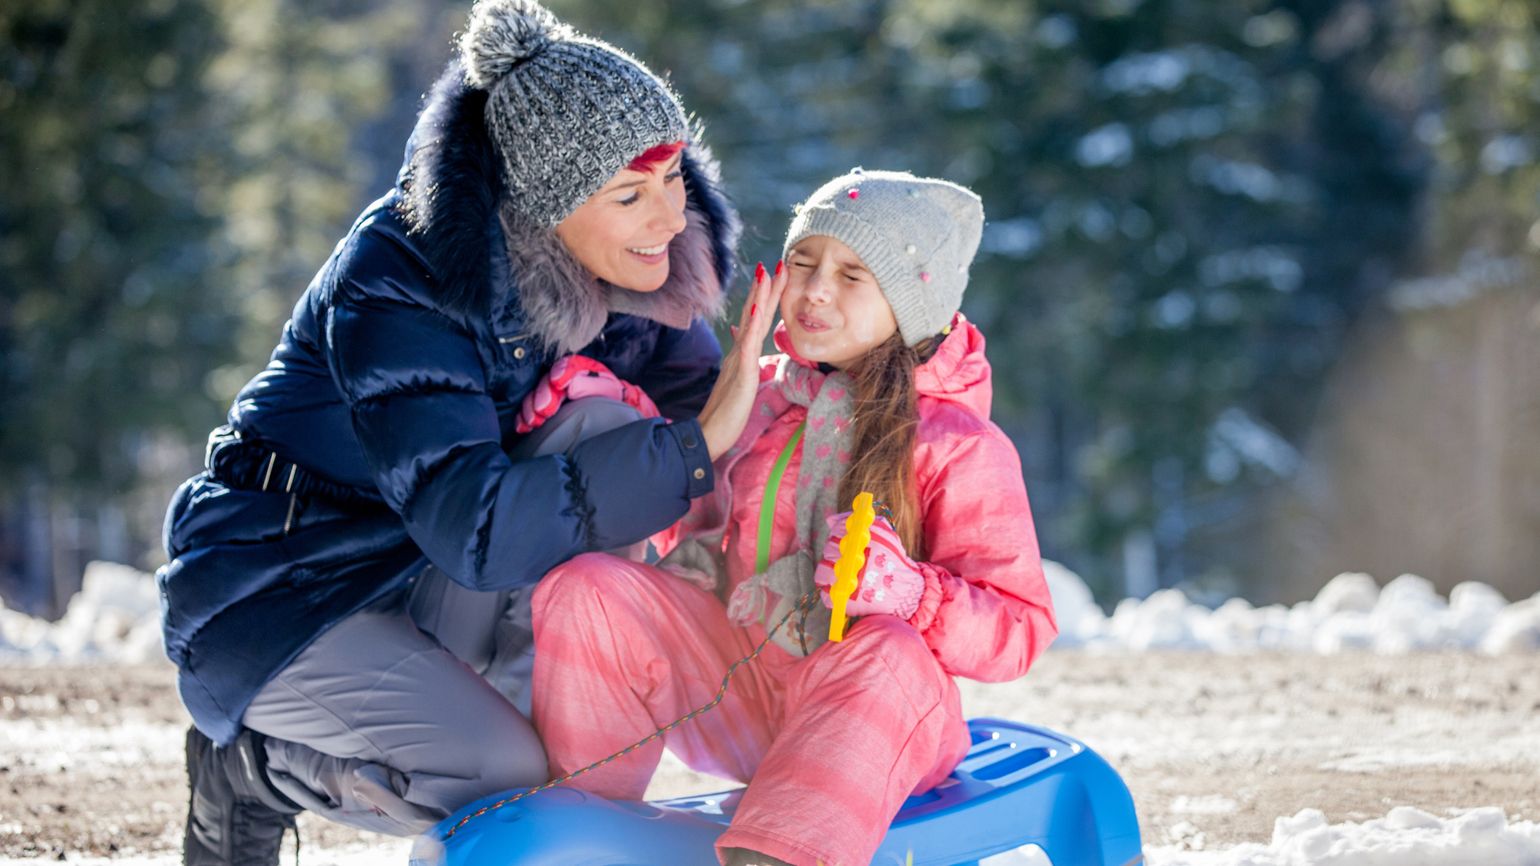 Health myths about Winter: Skip the Sunscreen. Mother applying sunscreen to daughter in winter. better living health wellness